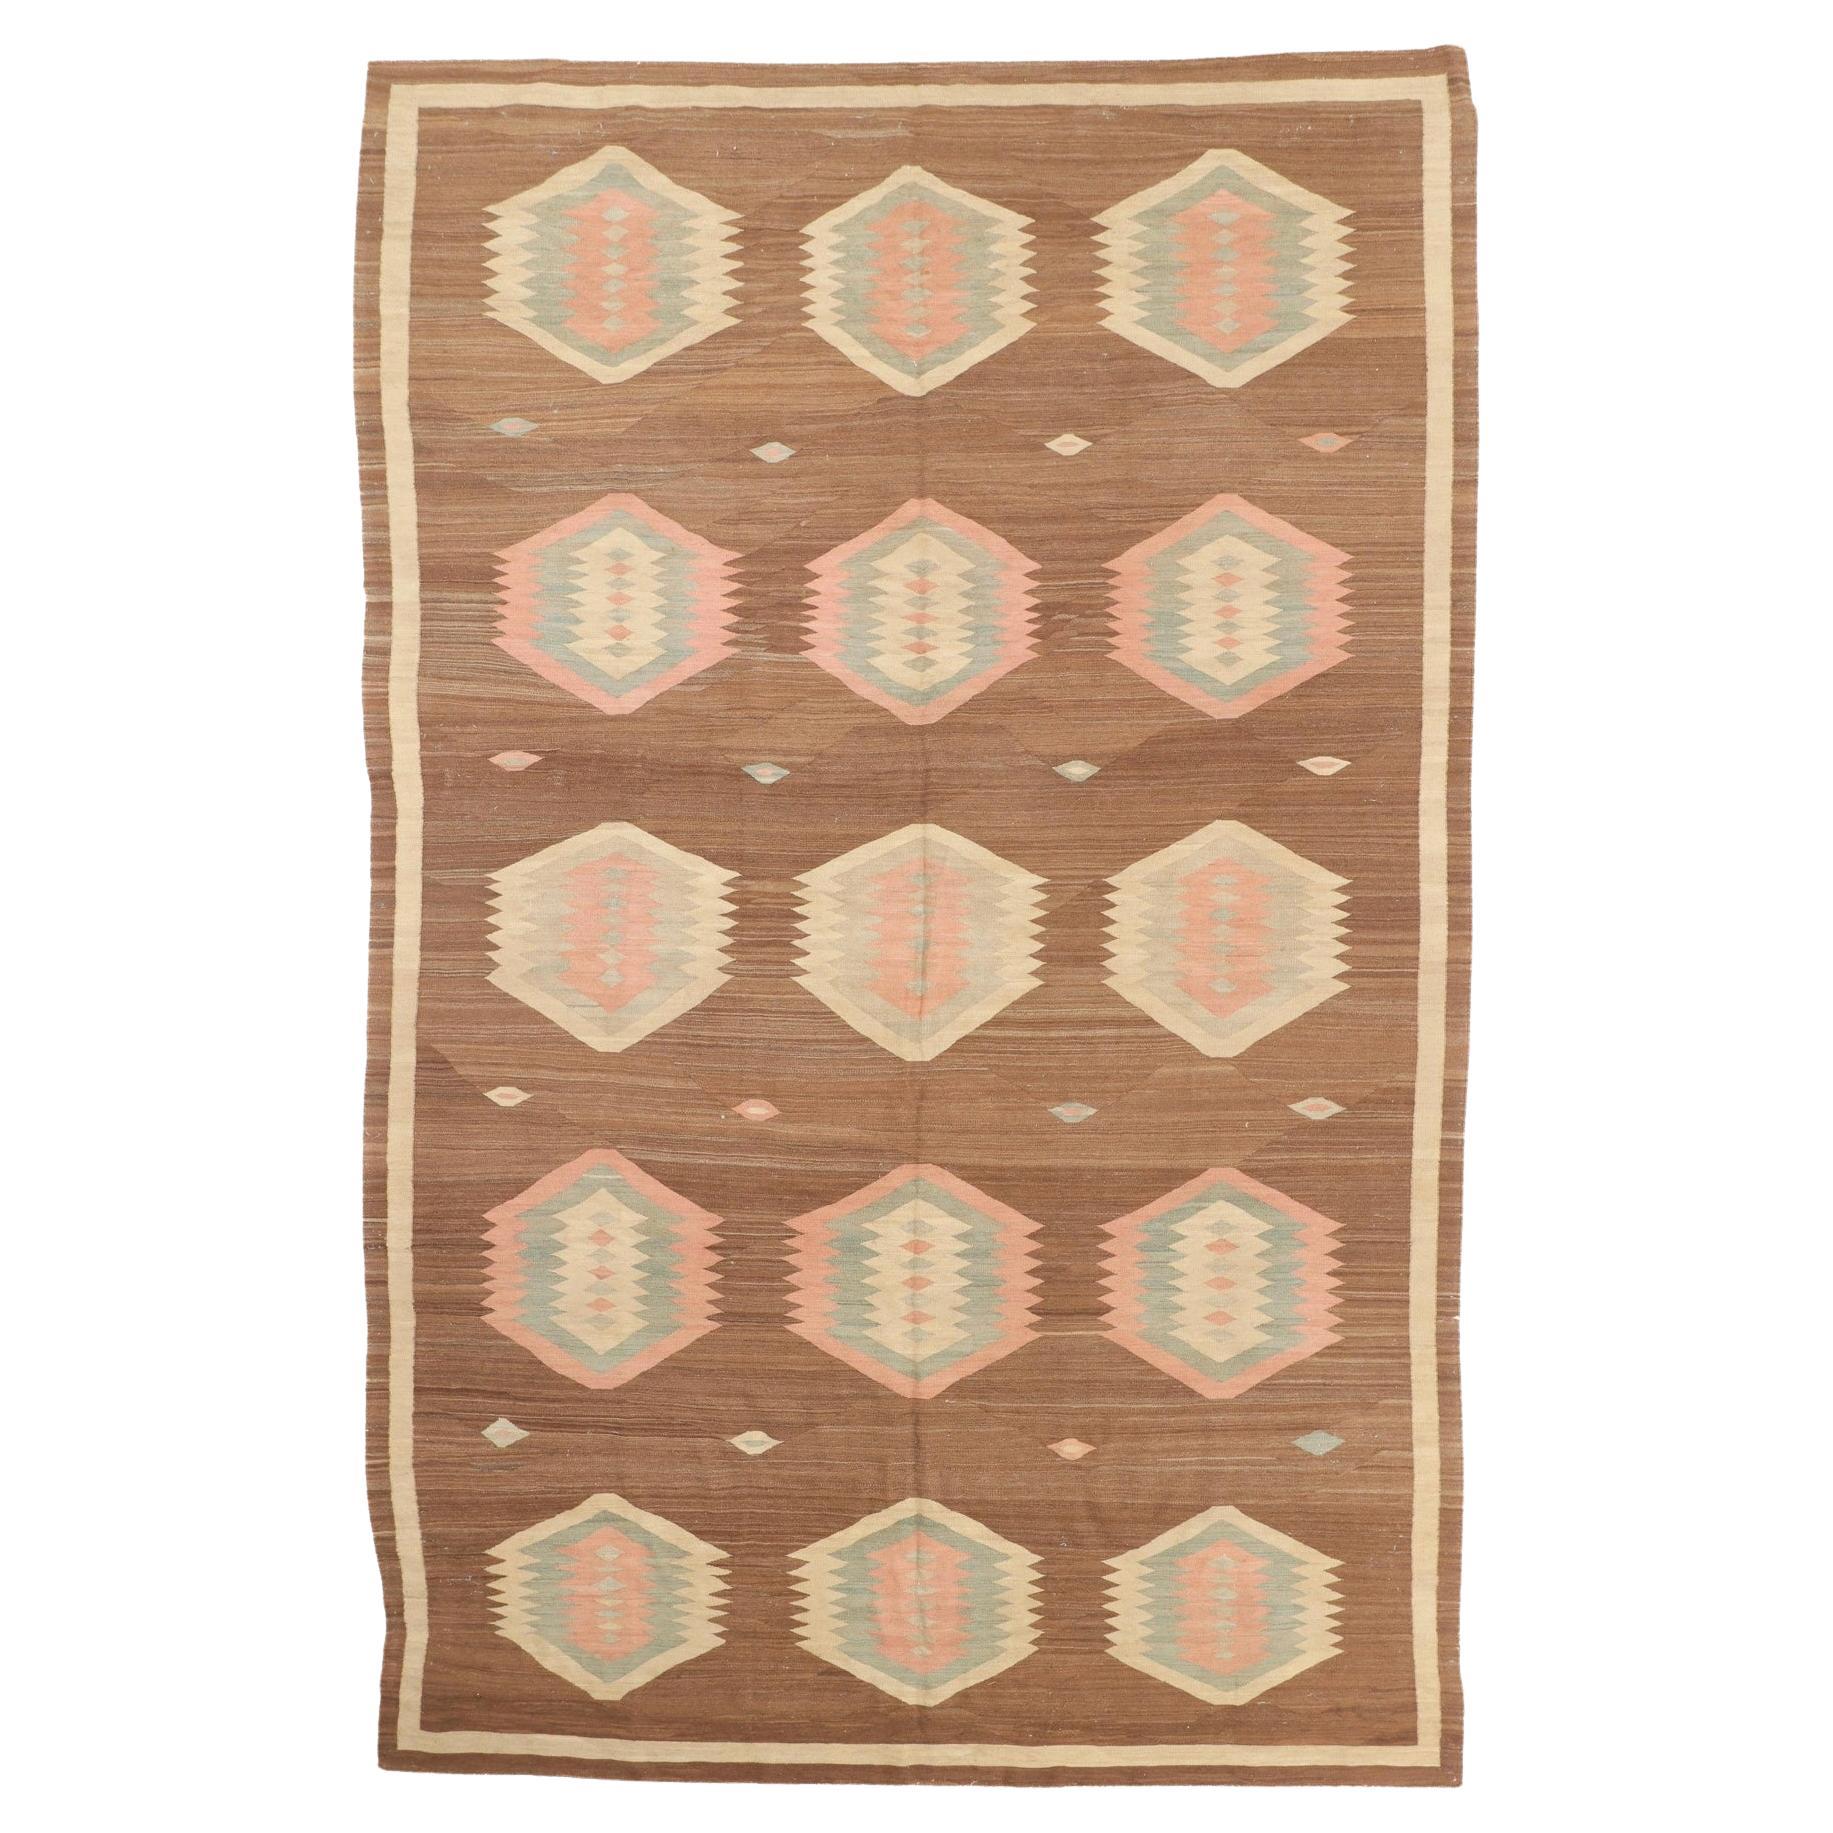 Antique Fine Bessarabian Kilim Large Neutral Rug, late 19th century  For Sale